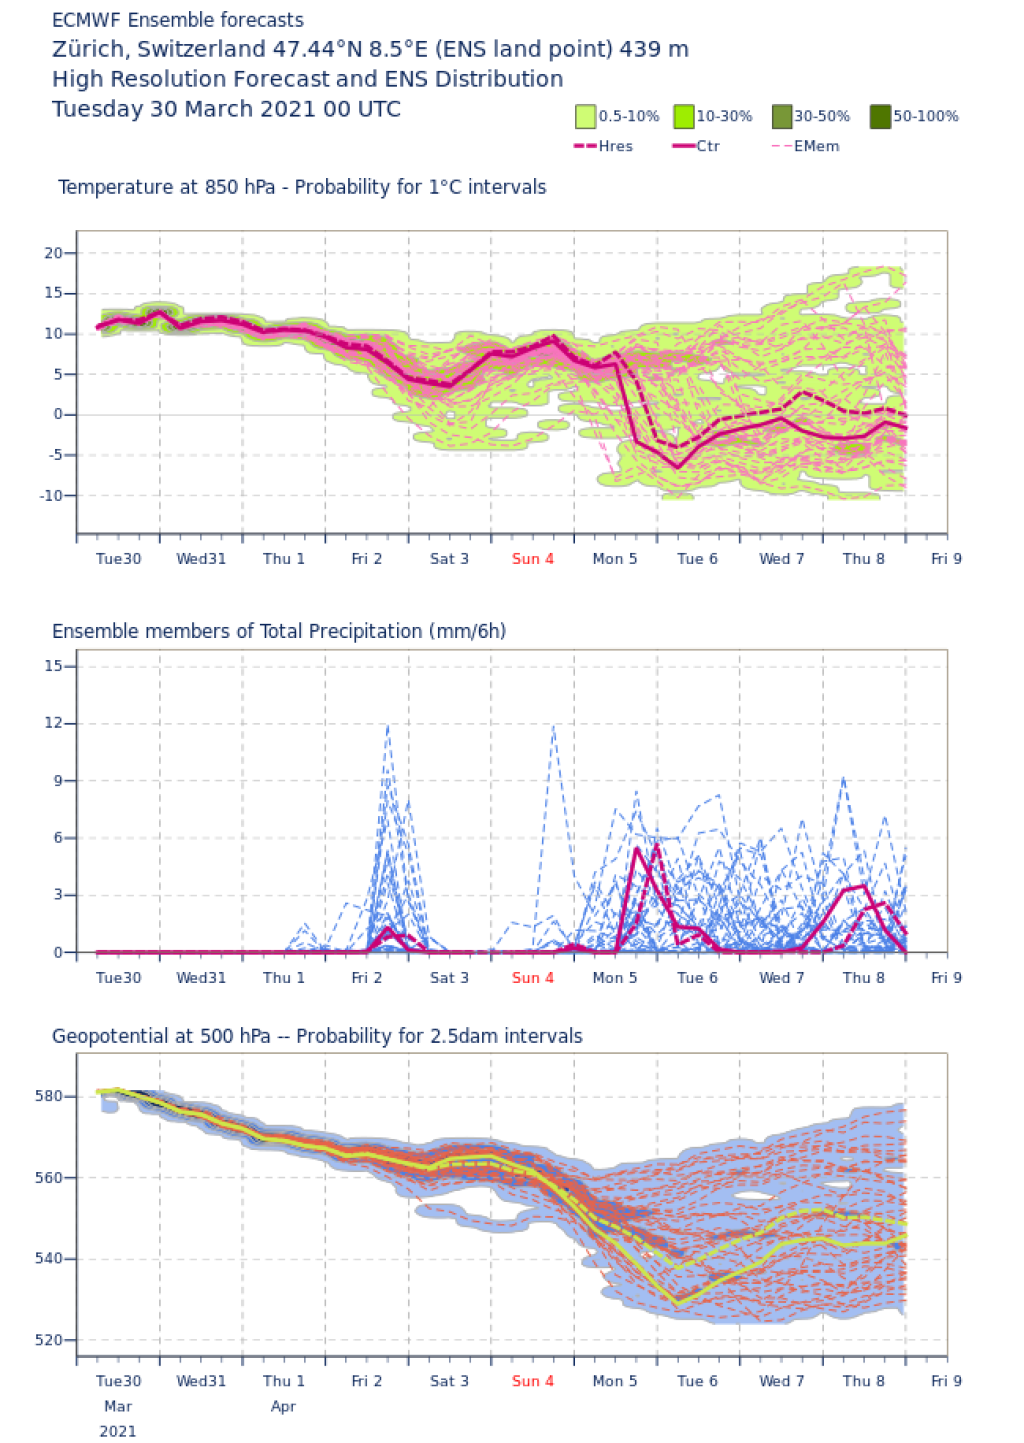 ECMWF meteogram, exemplary for Zurich. From Monday, major uncertainties with room for surprises in all directions.